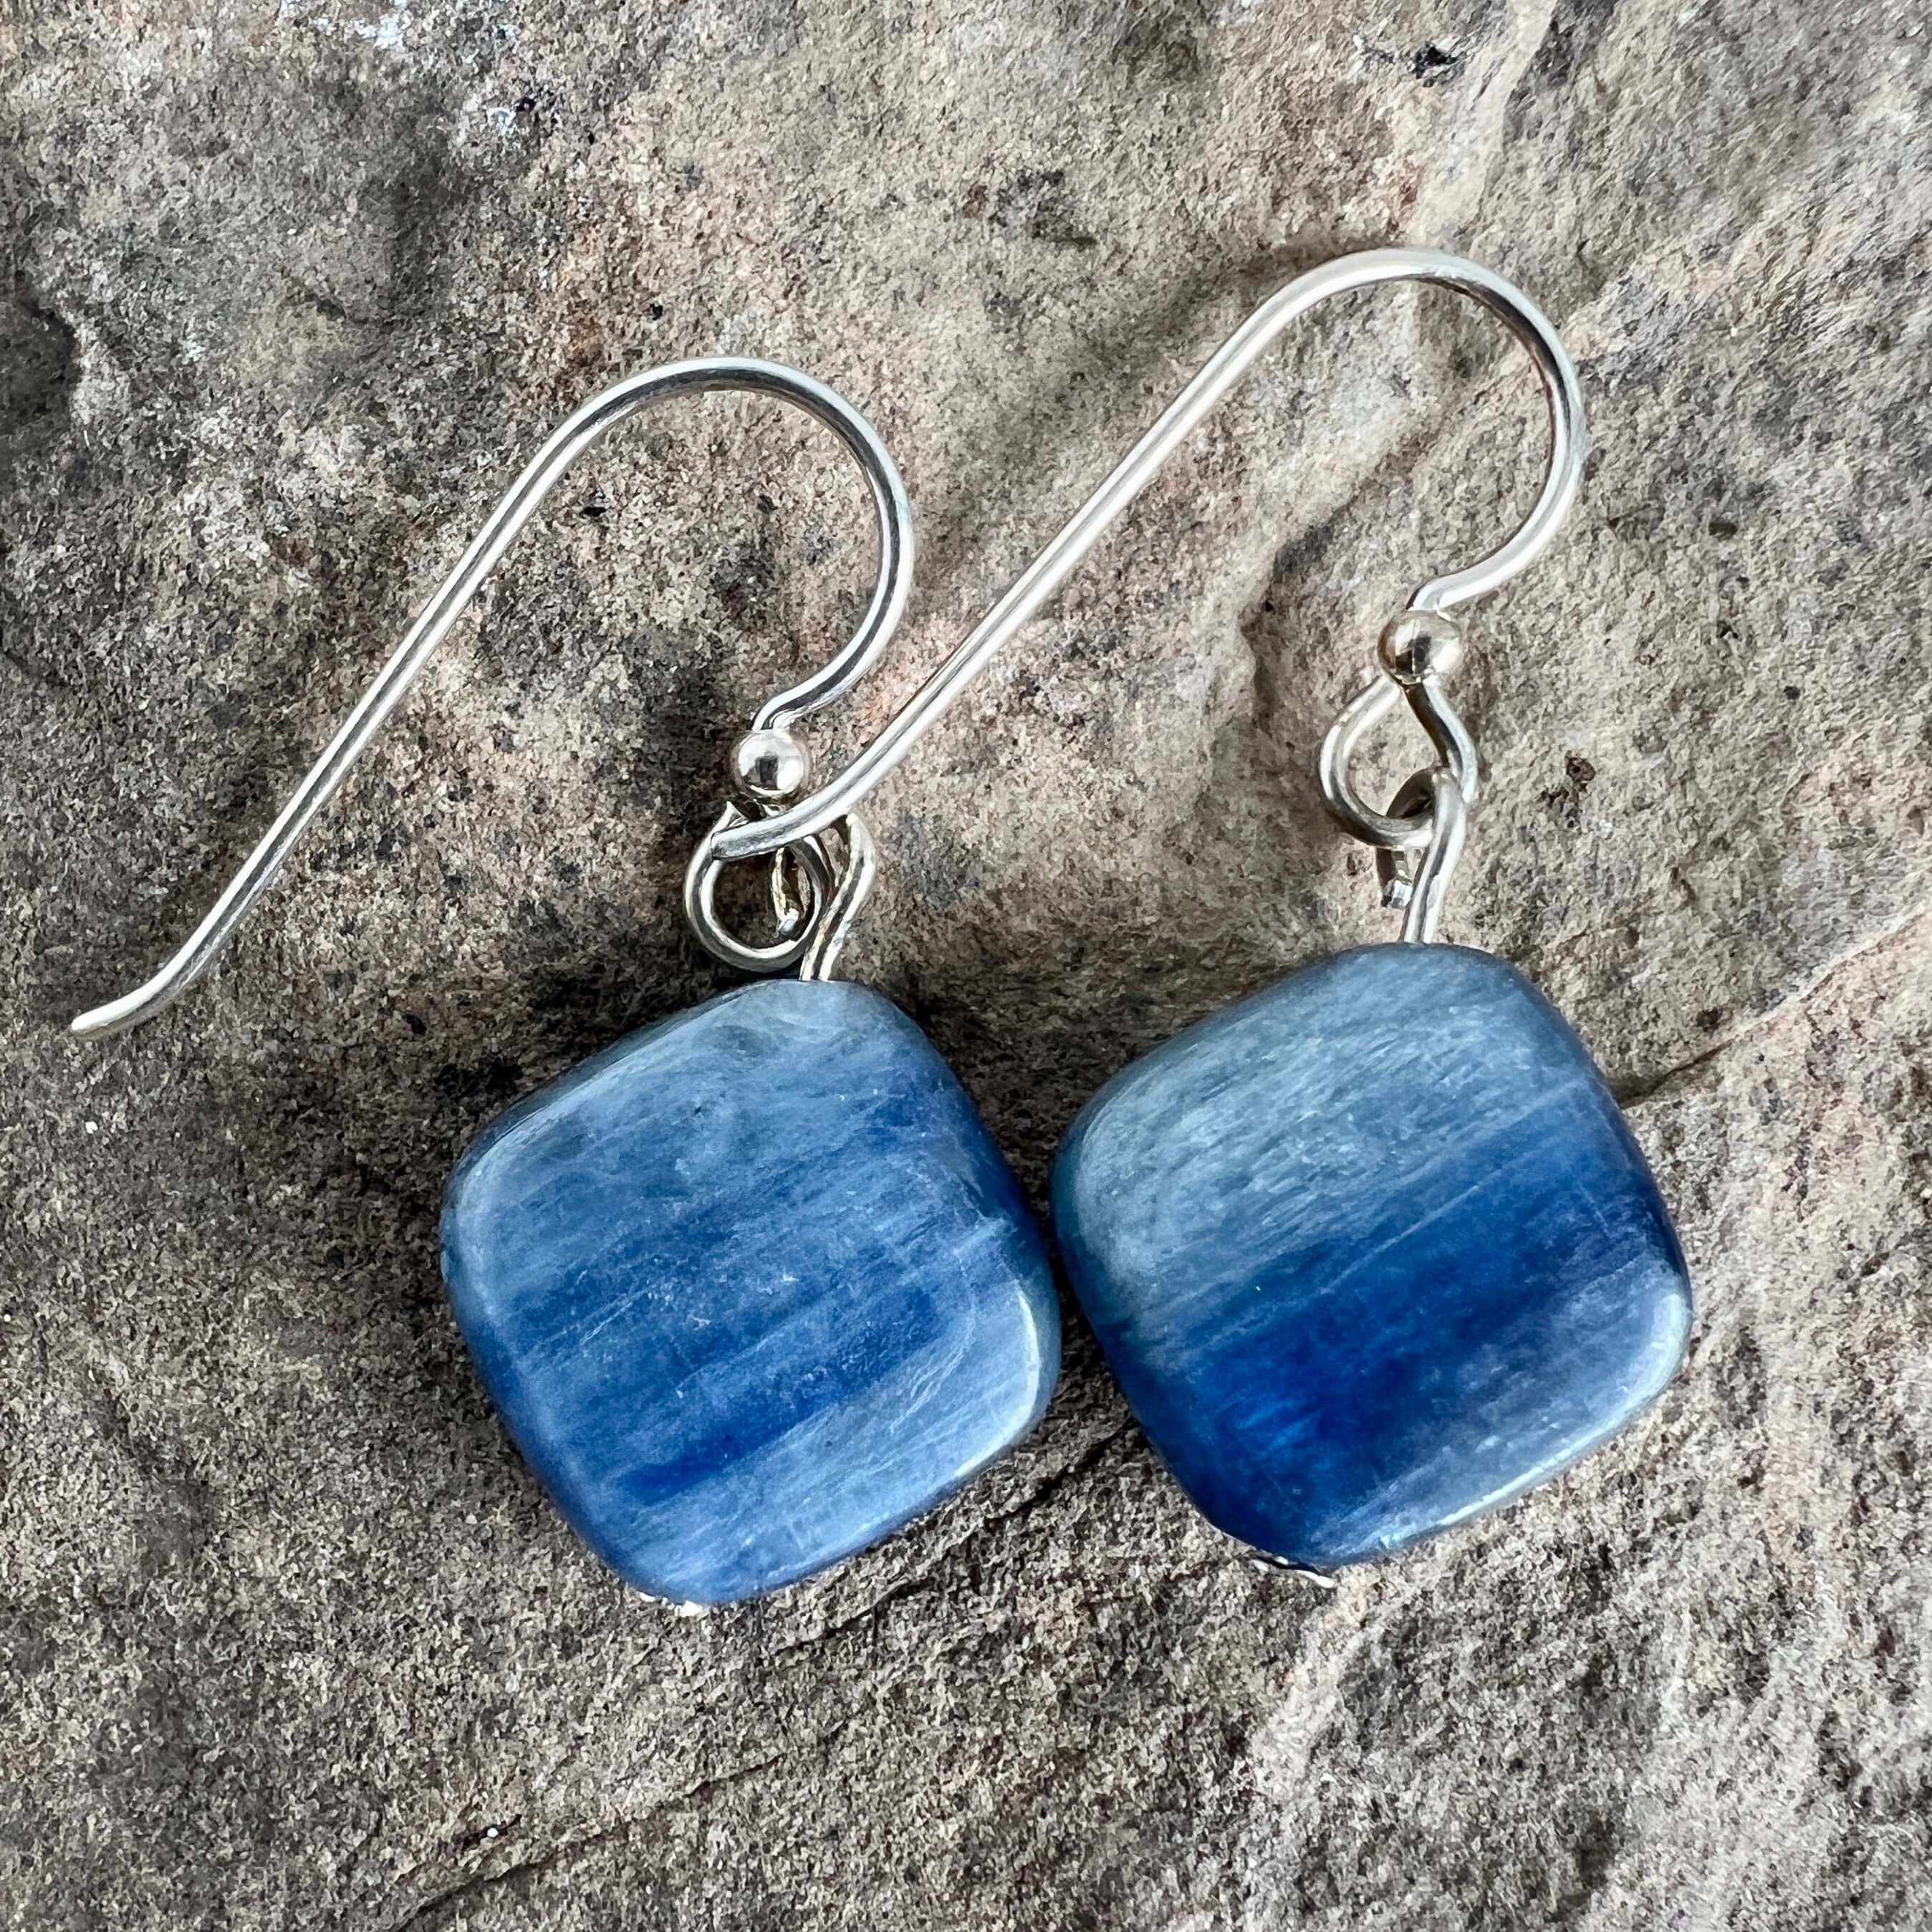 Kyanite Earrings These earrings are made with Kyanite gemstones which help in seeking truth through focus and logic. Zodiac Signs: Aries, Taurus & Libra. Chakras: All. Handmade with authentic crystals & gemstones in Minneapolis, MN.